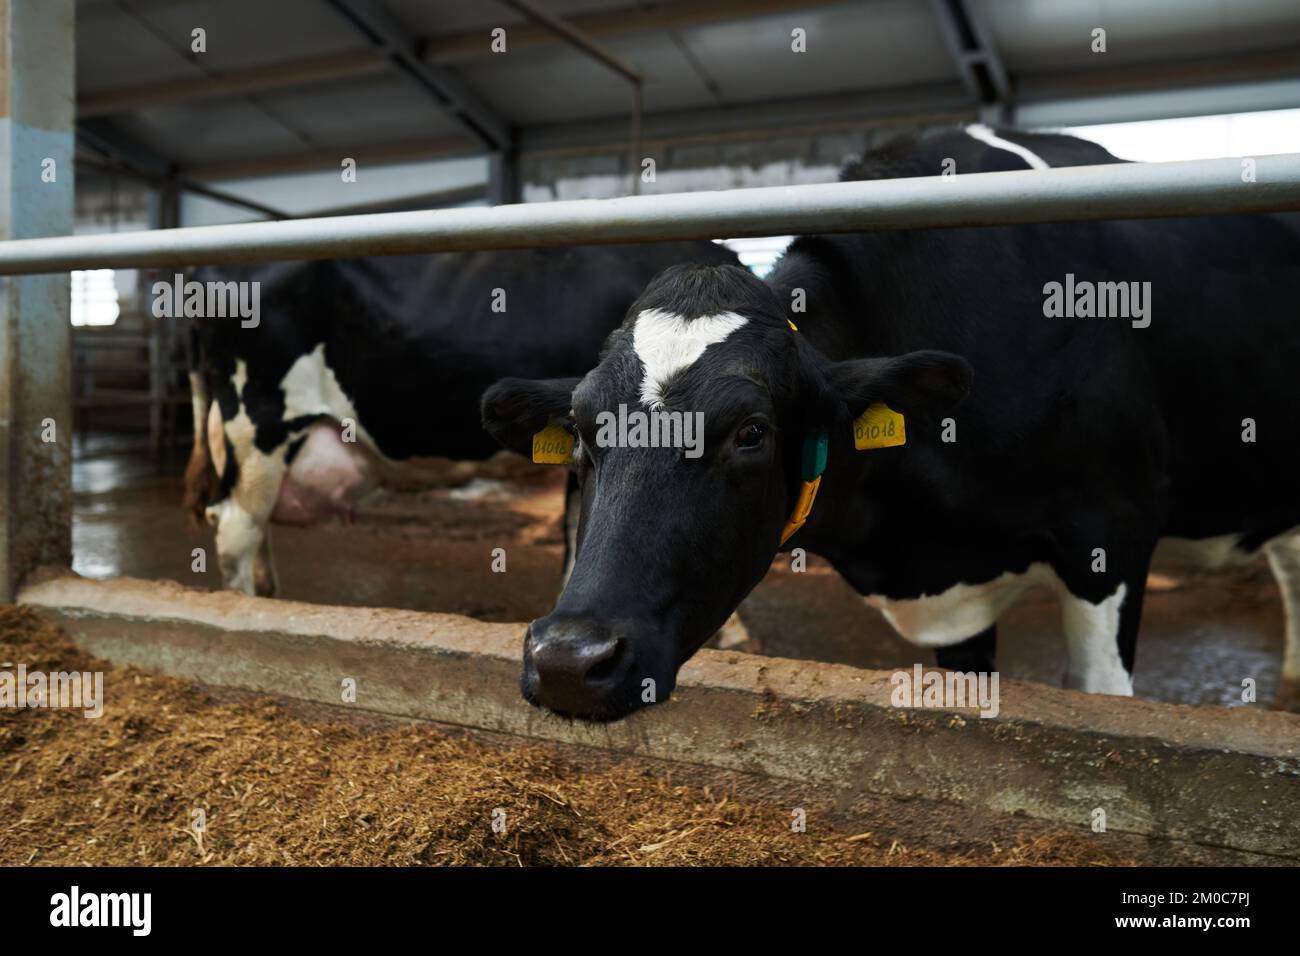 Black dairy cow with white spots on forehead and chest standing in cowshed in front of camera and eating food from feeder Stock Photo